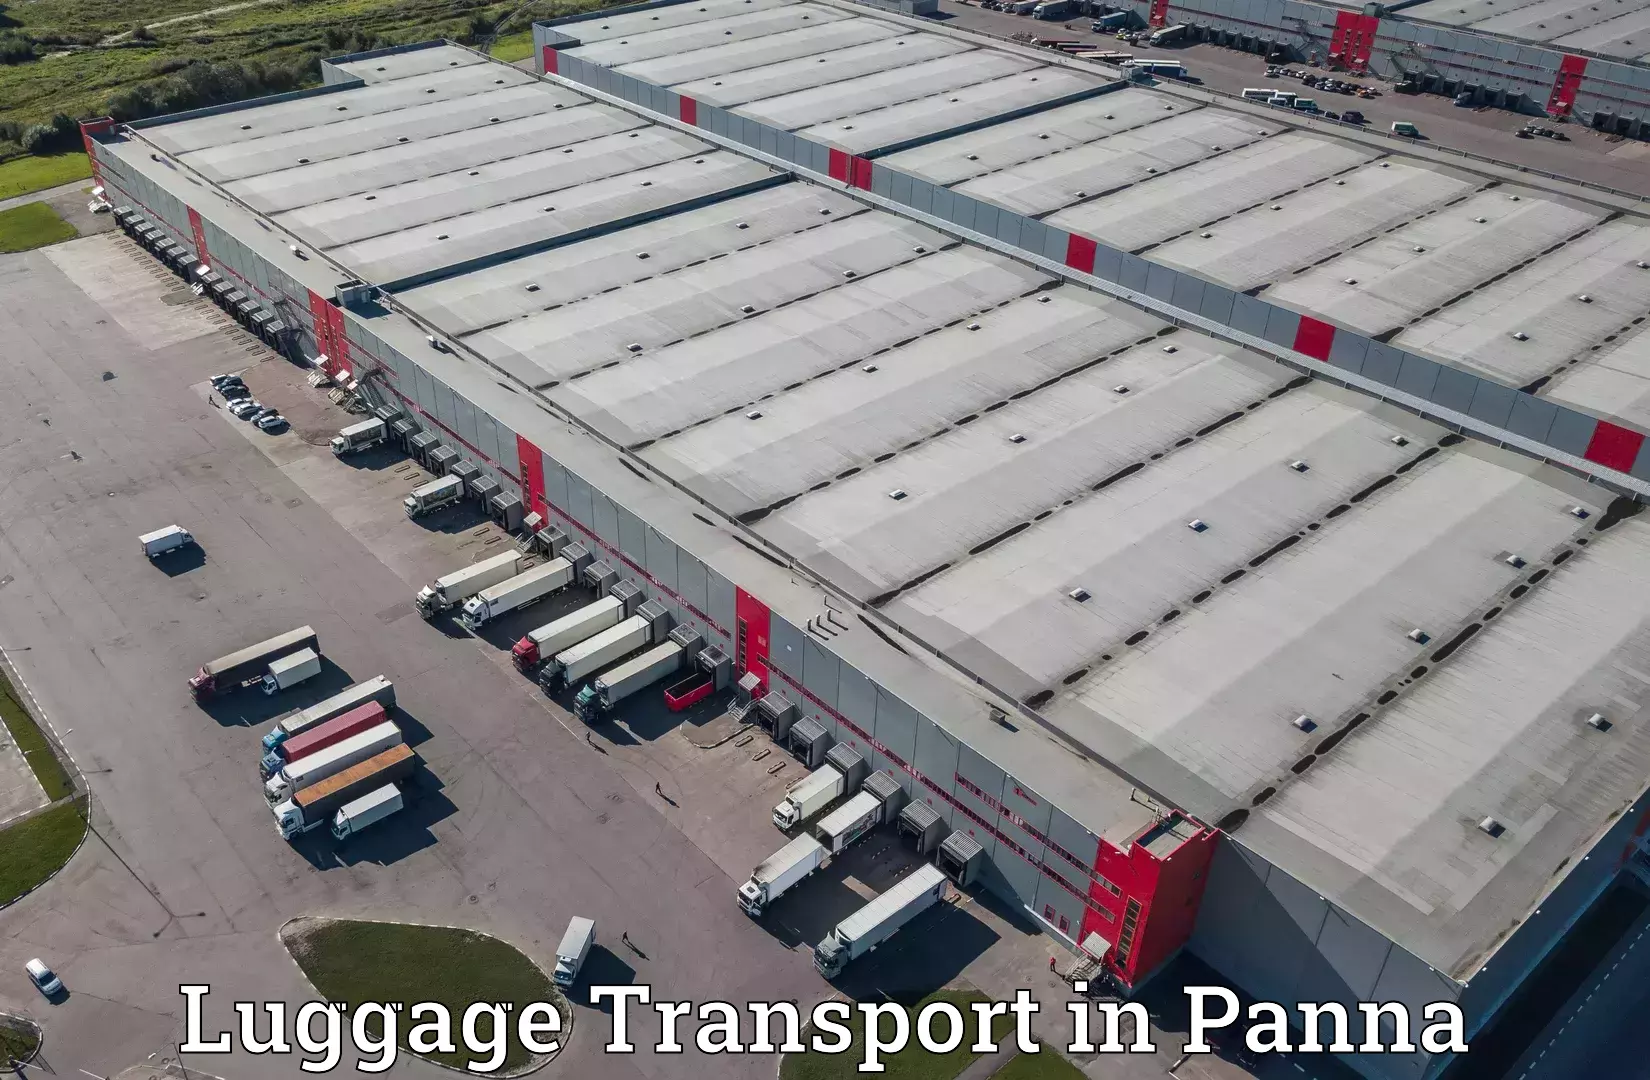 Luggage shipment tracking in Panna